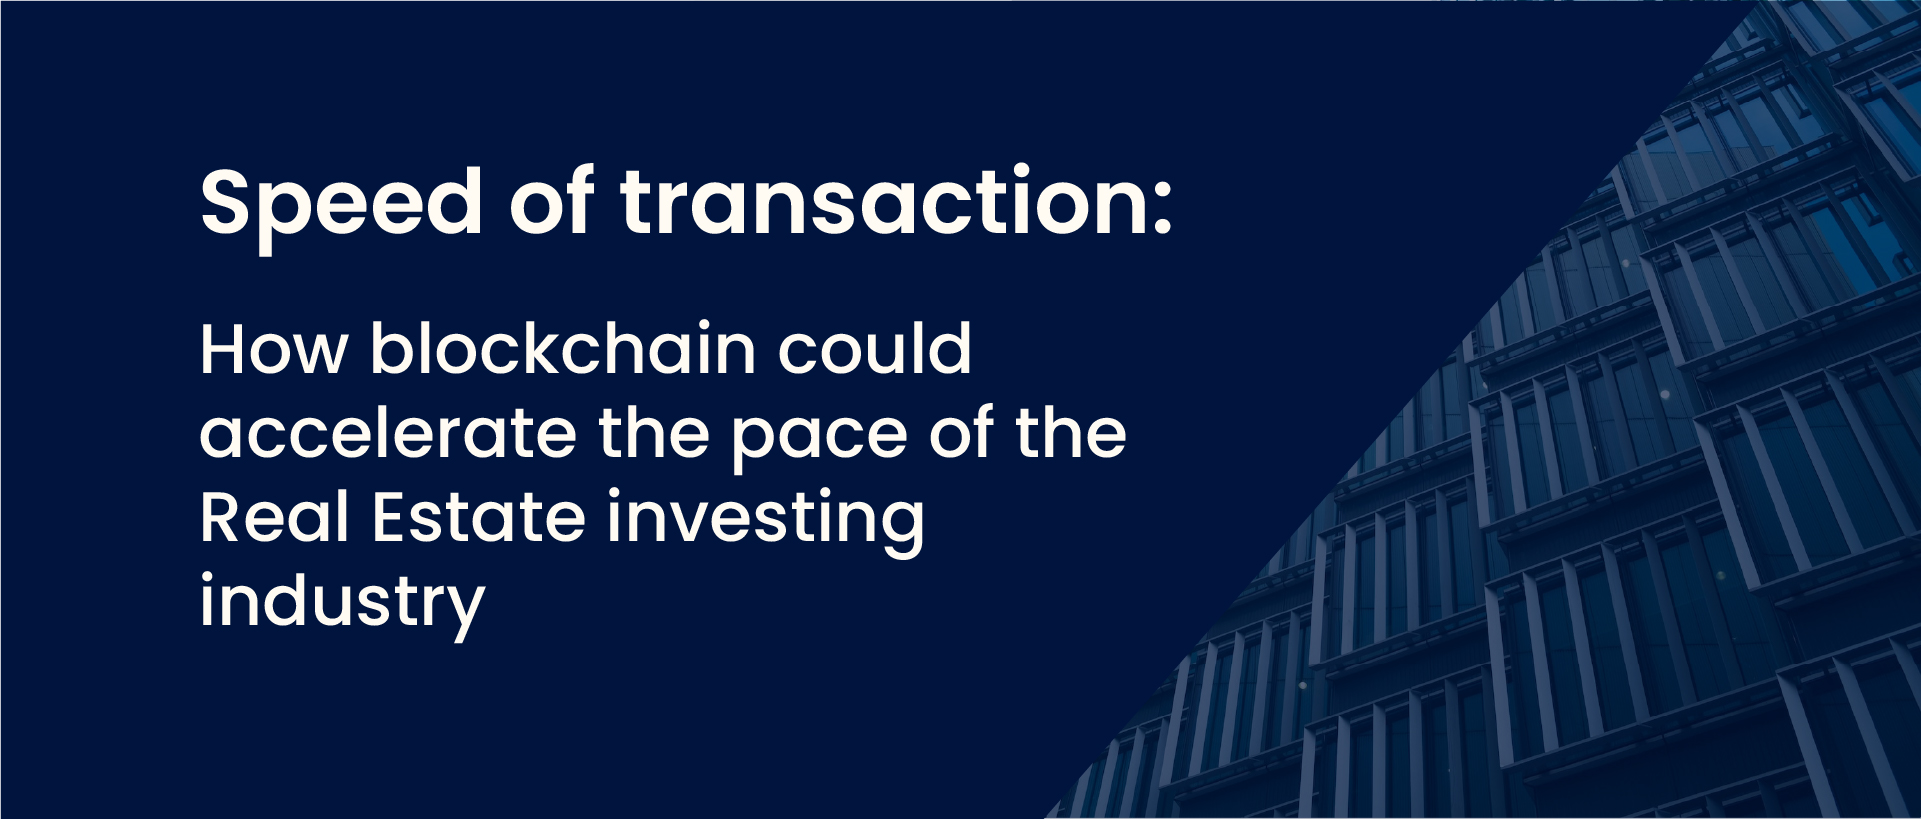 How Blockchain Could Accelerate the Pace of the Real Estate Investing Industry